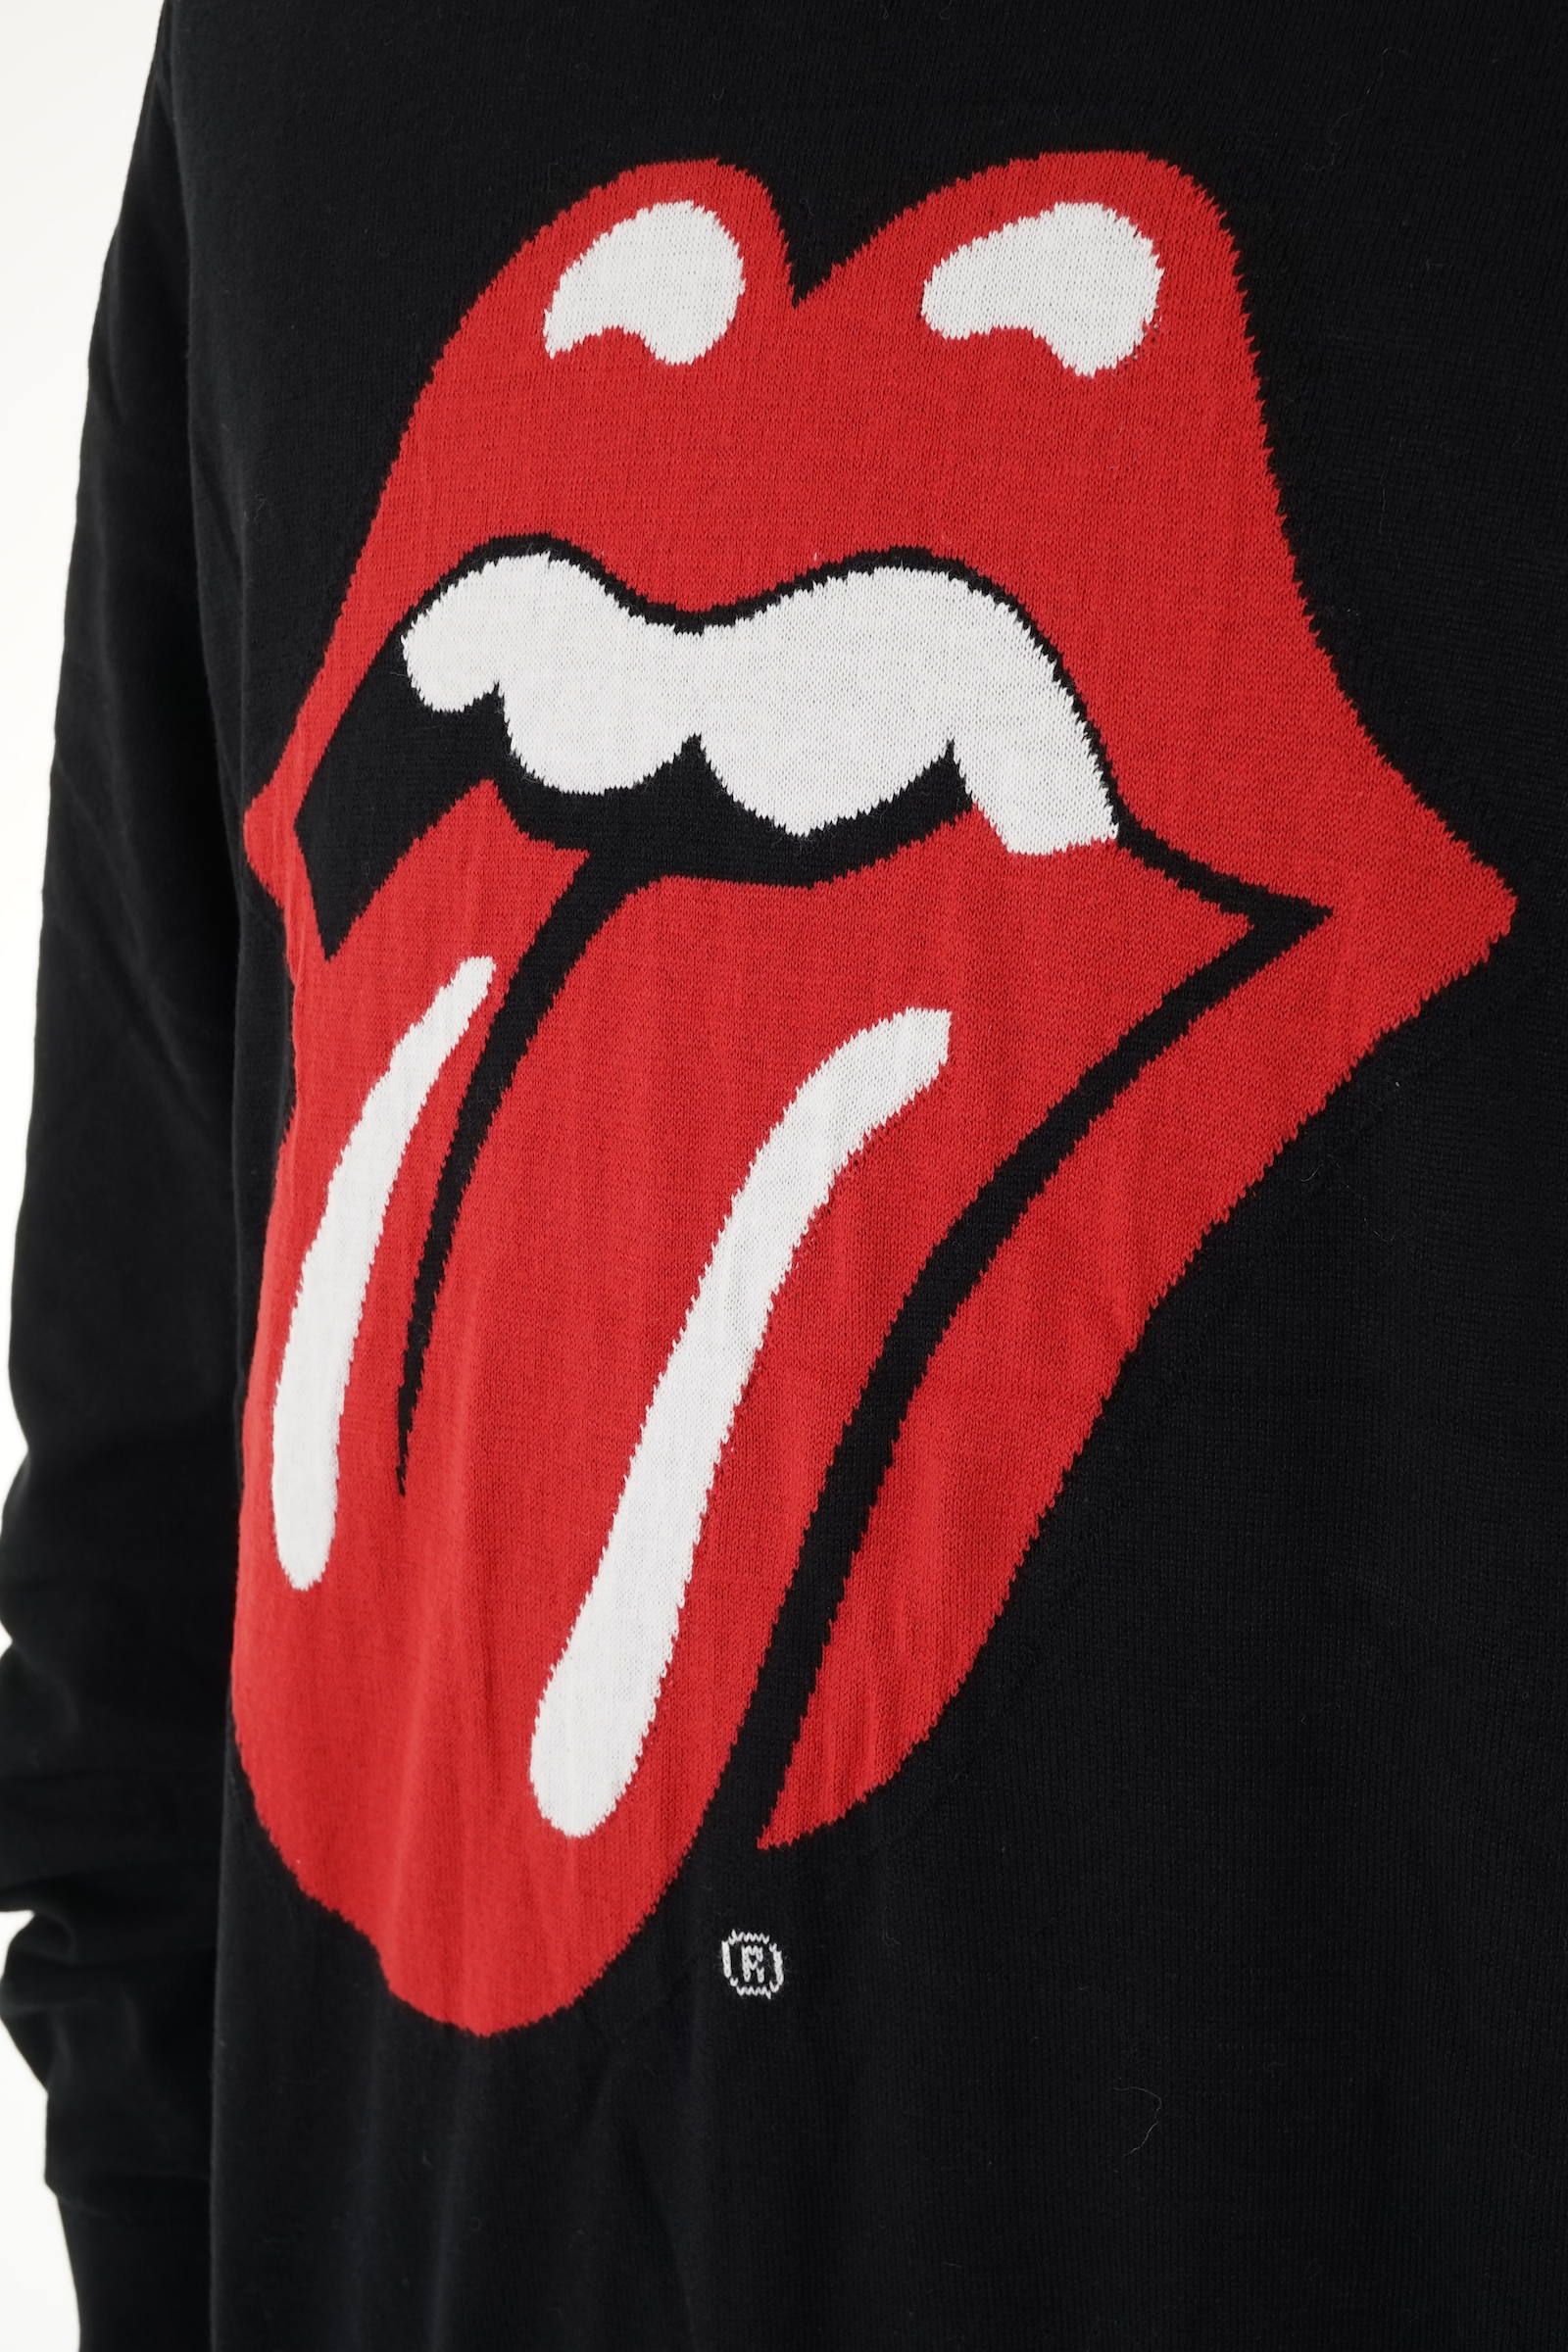 Marbles - THE ROLLING STONES × MARBLES INTARSIA KNIT